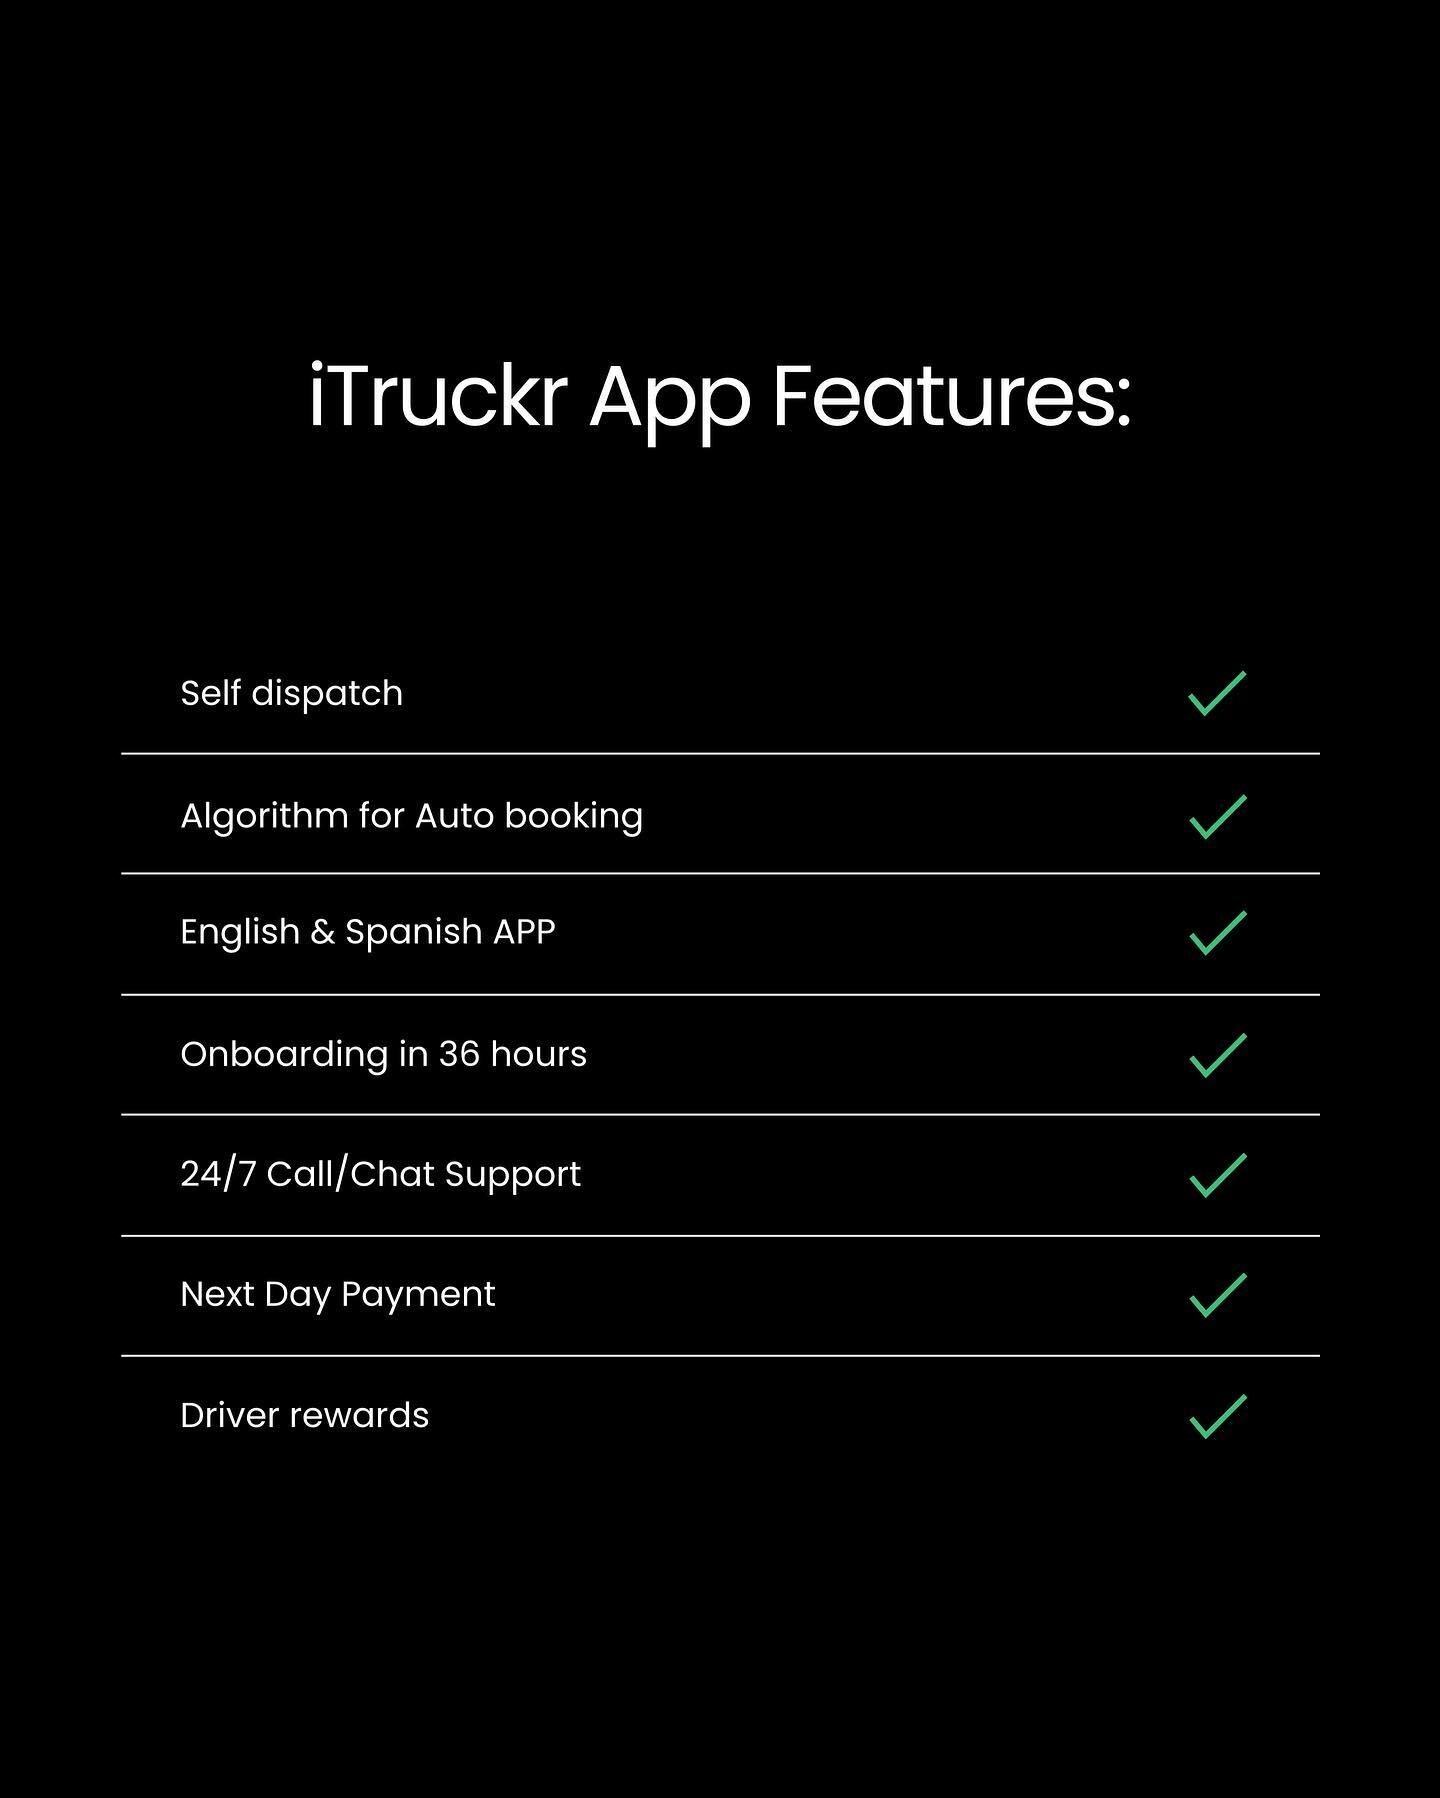 A brief overview of the exciting features that make up the iTruckr App!! 🚛📲 which feature excites you the most? 🤩